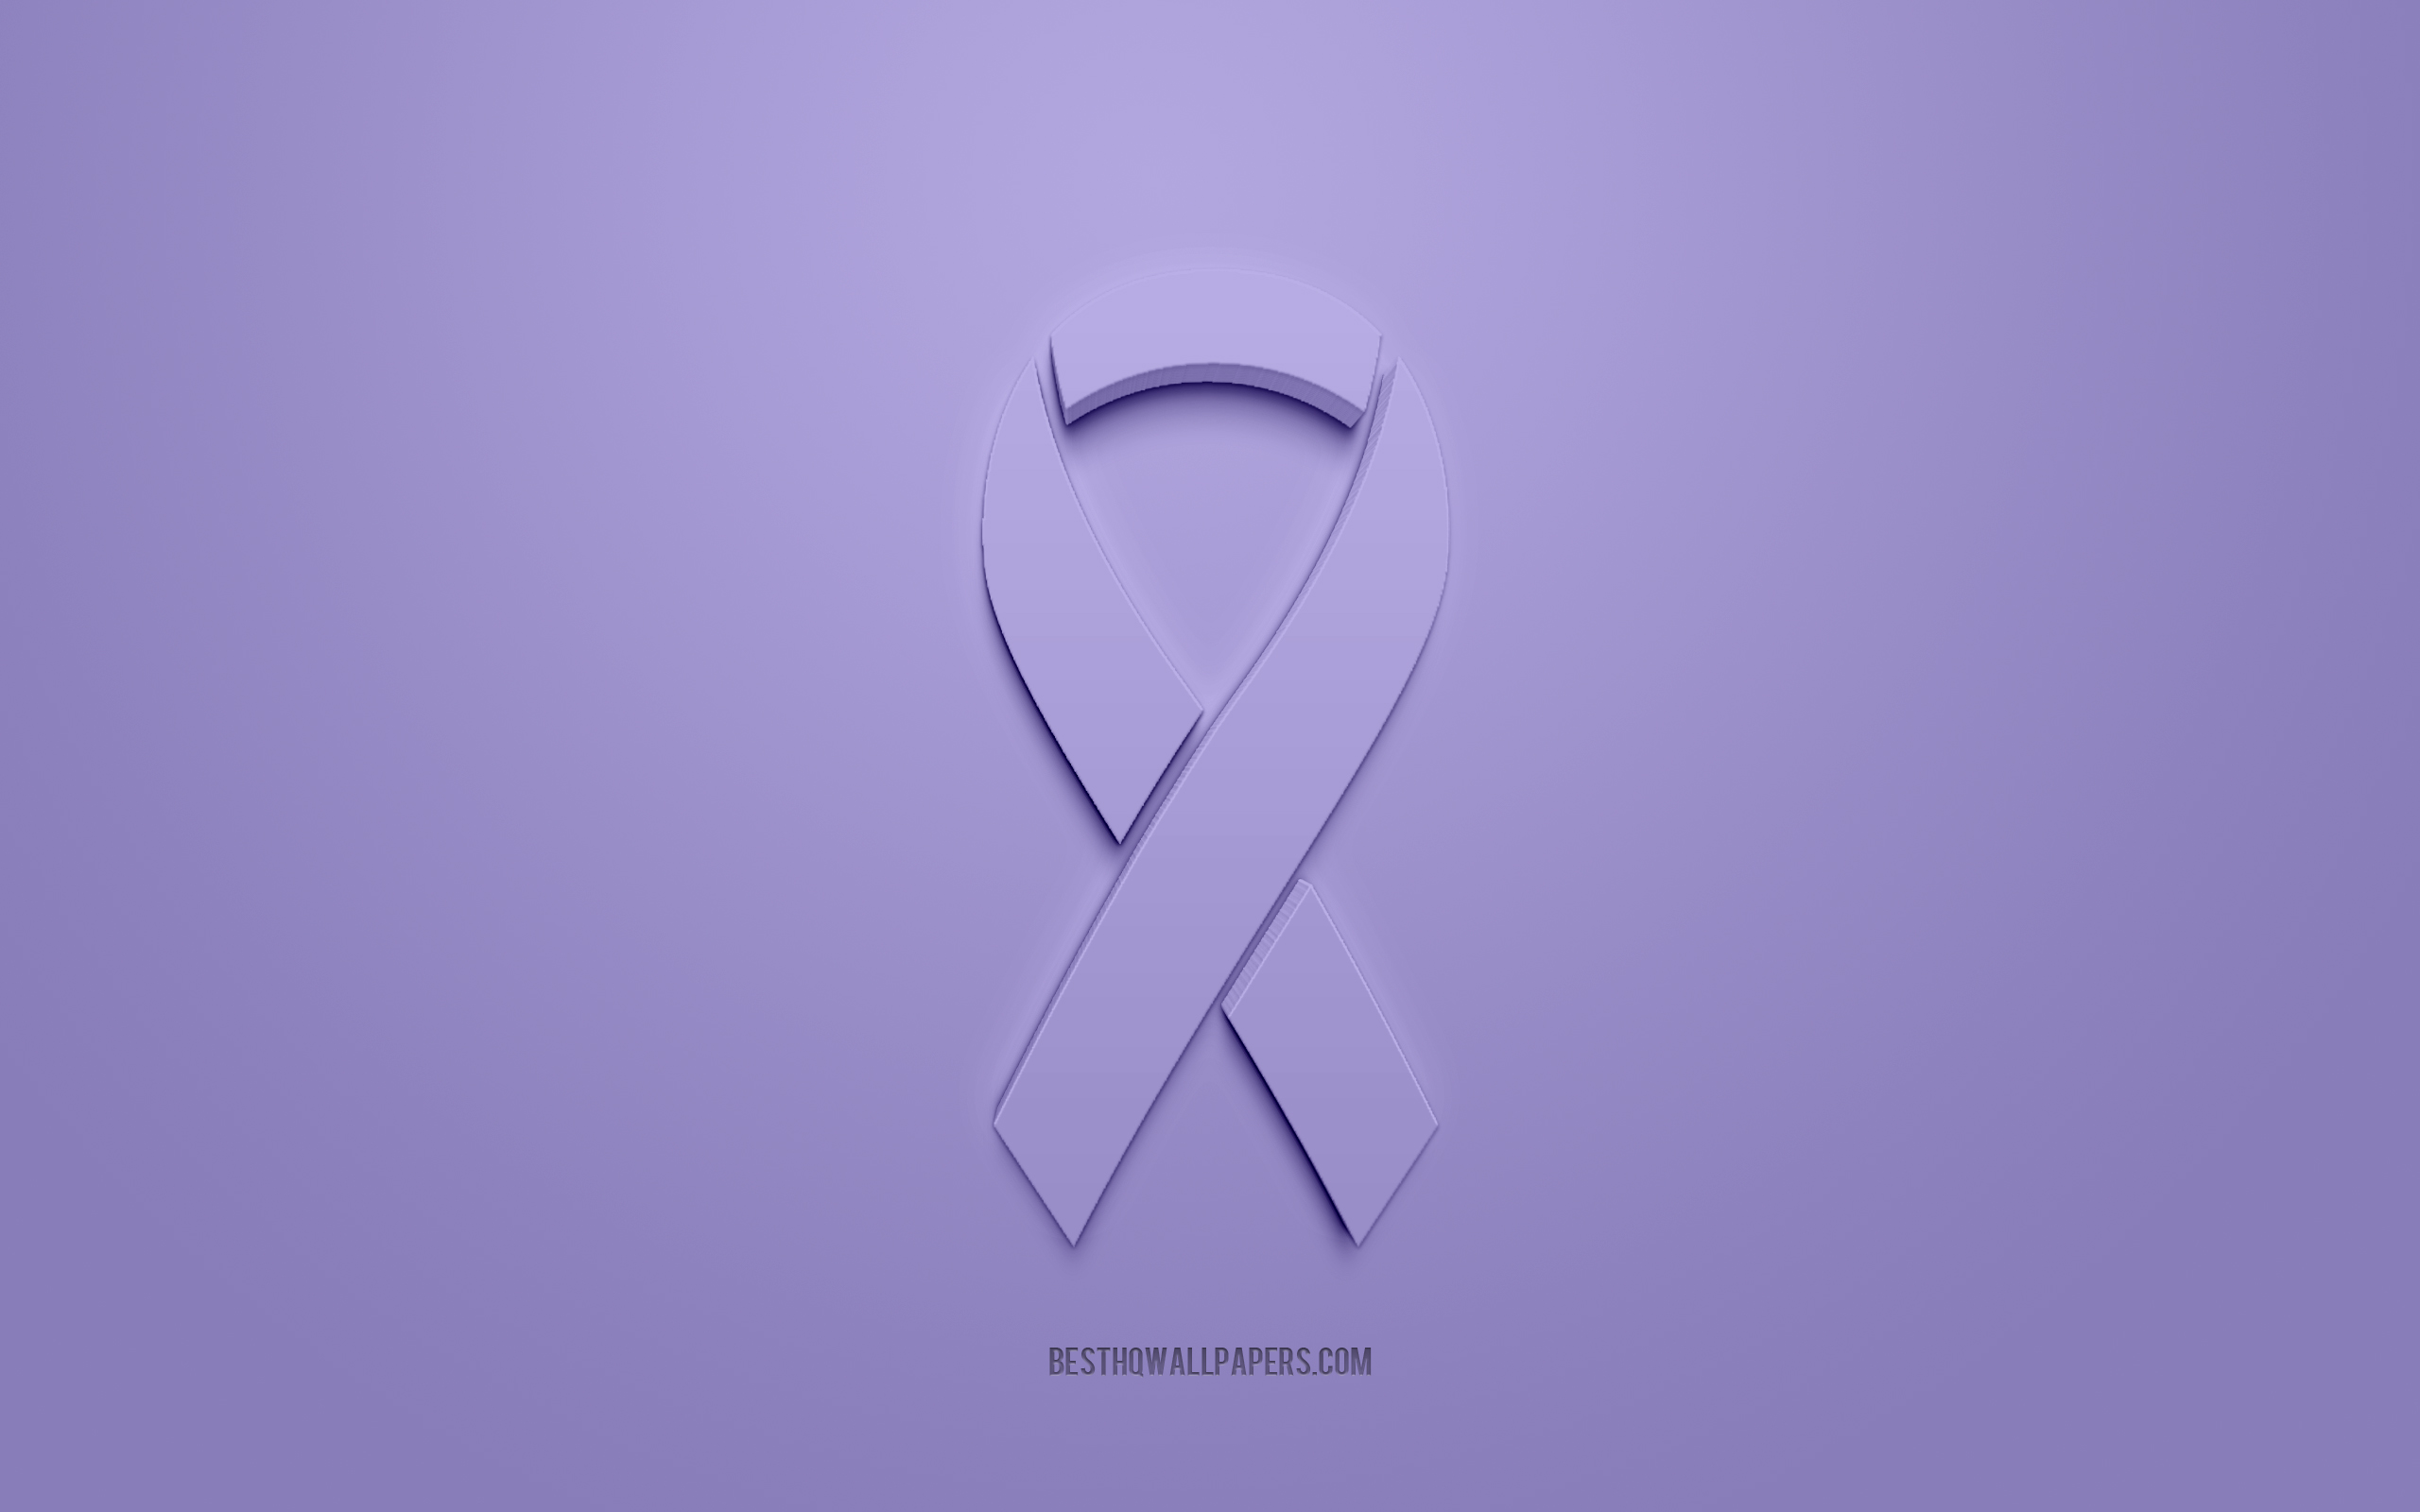 Download wallpaper Stomach Cancer ribbon, purple 3D ribbon, Stomach Cancer Awareness ribbon, Stomach Cancer, purple background, Cancer ribbons, Awareness ribbons for desktop with resolution 2560x1600. High Quality HD picture wallpaper